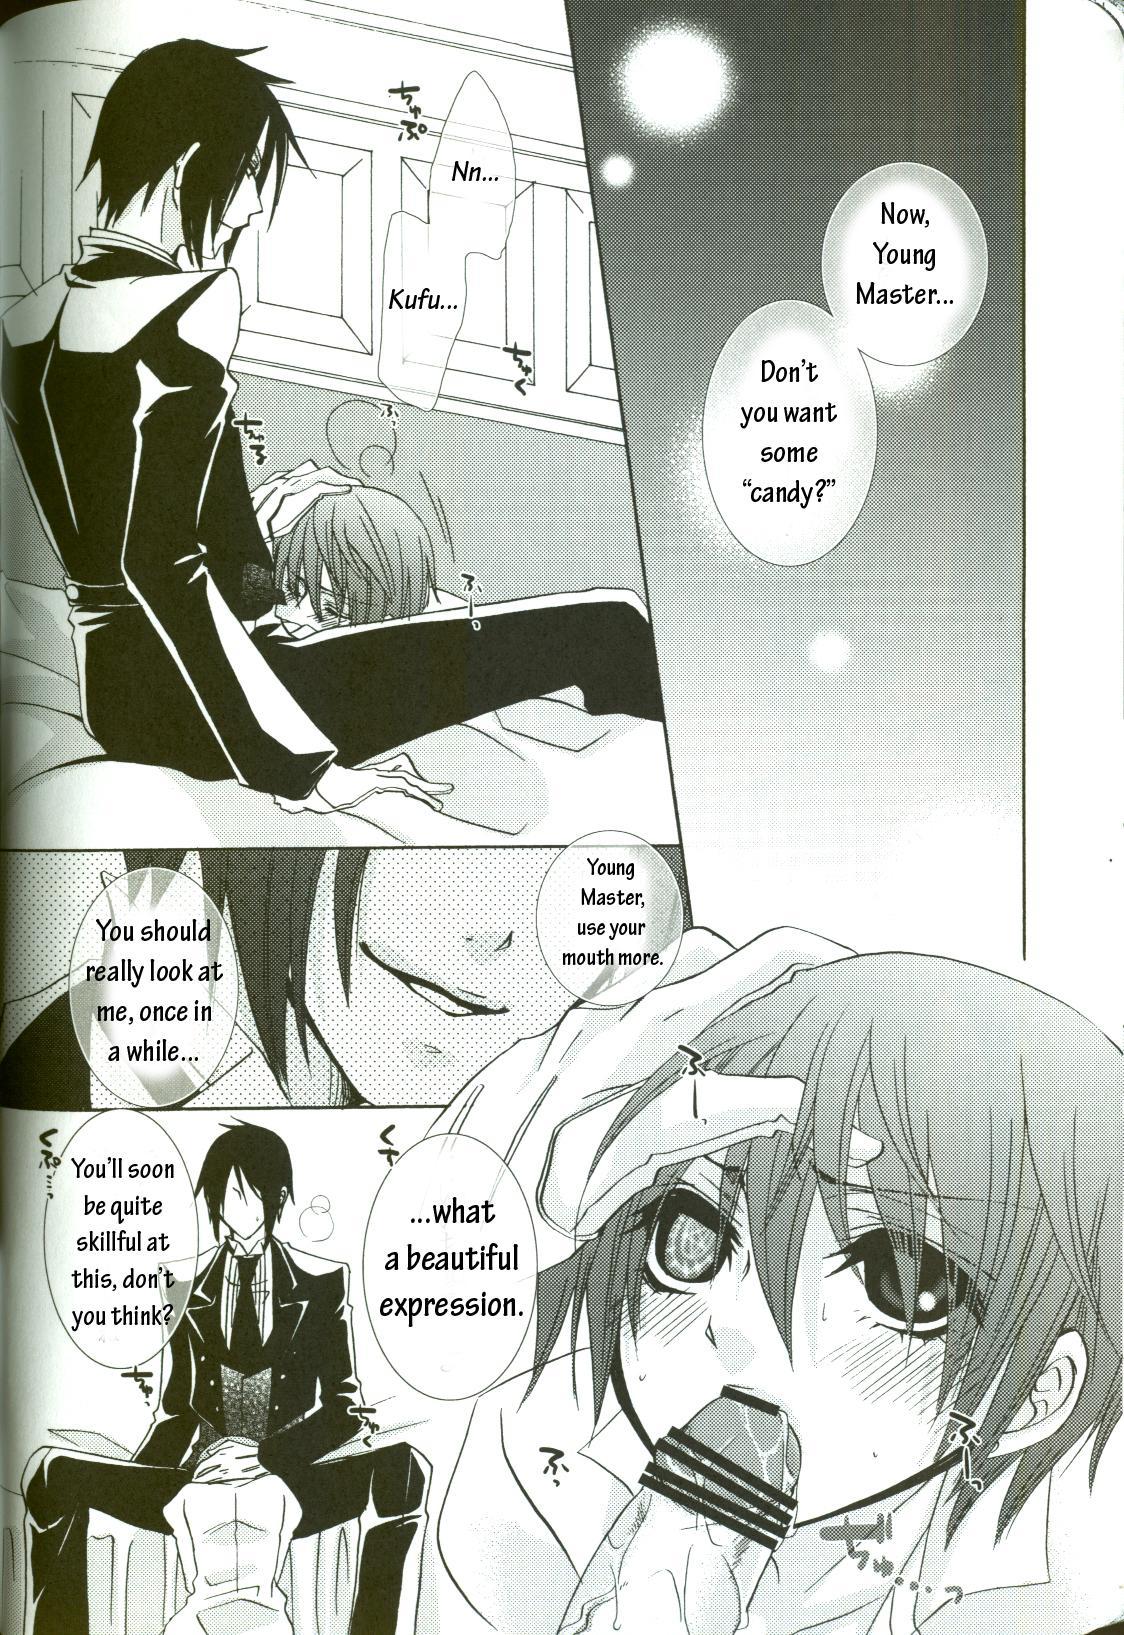 Home Trick or Treat? - Black butler Cash - Page 7